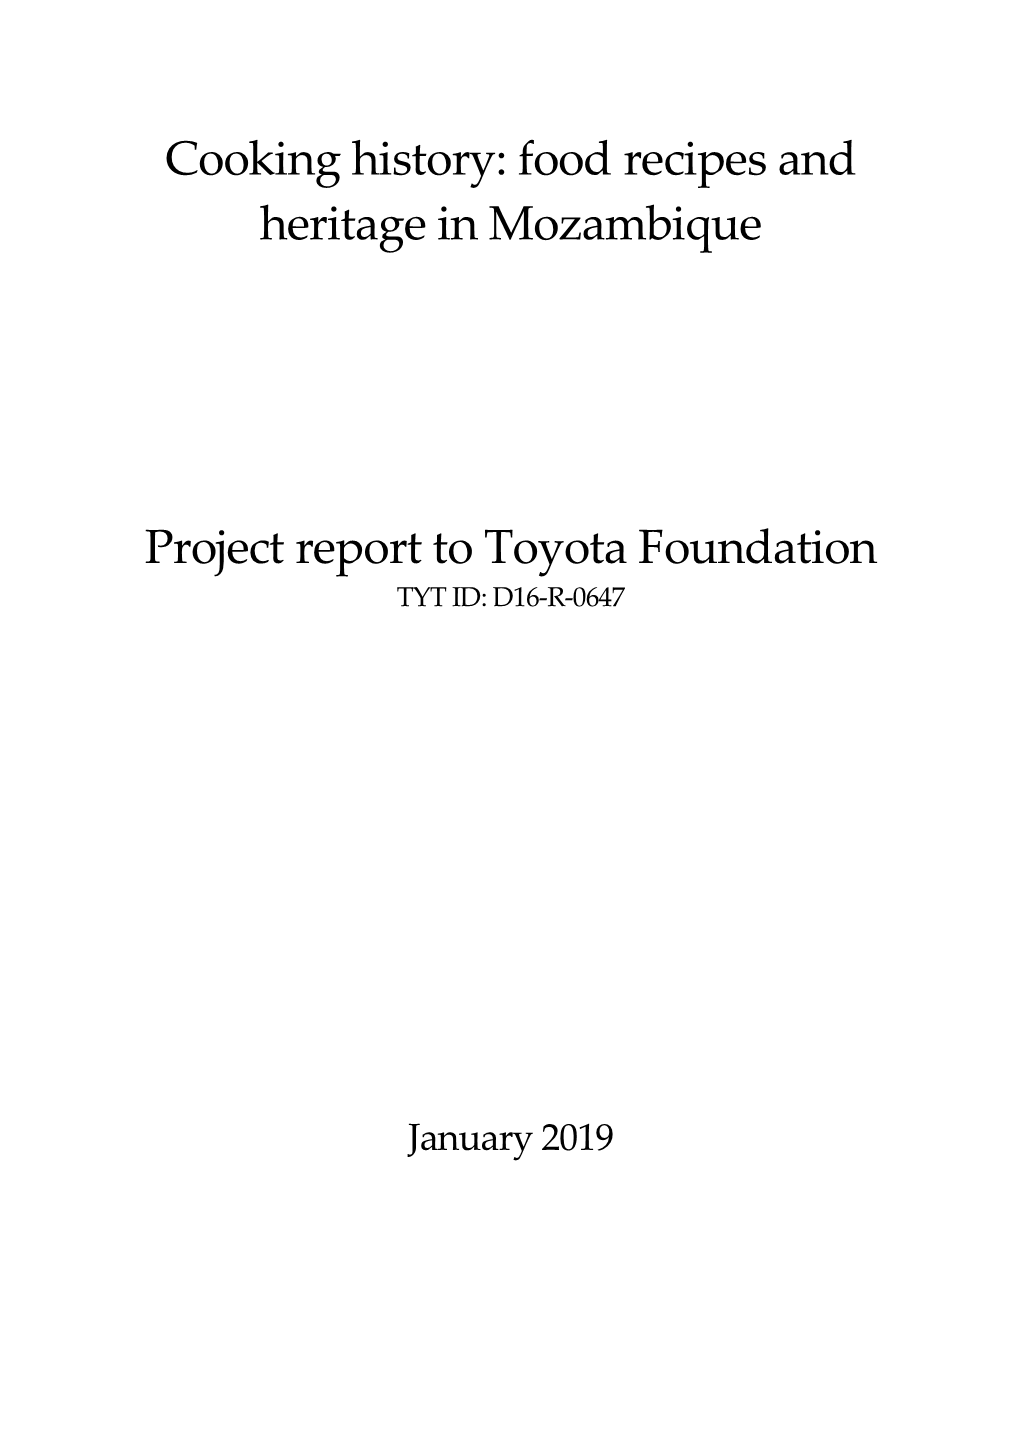 Cooking History: Food Recipes and Heritage in Mozambique Project Report to Toyota Foundation